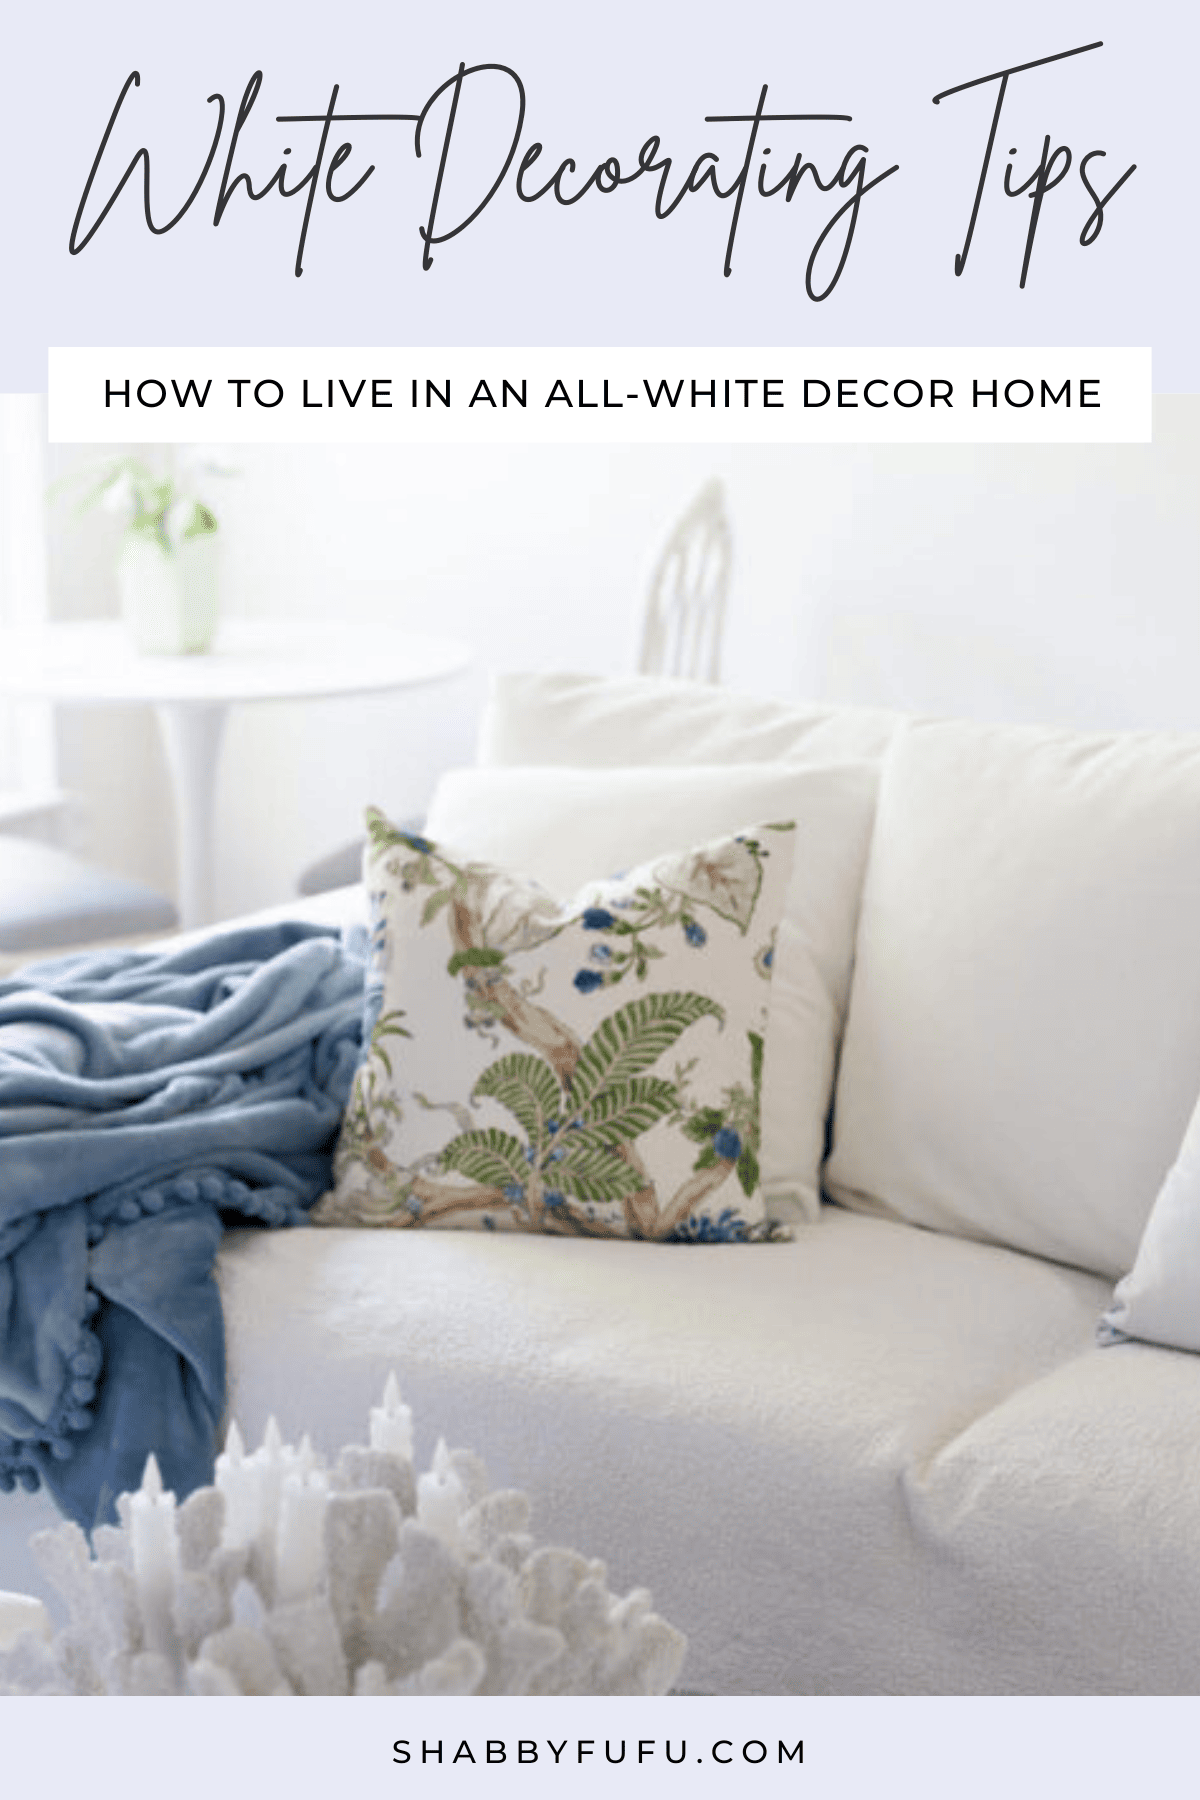 Pinterest Graphic, featuring a living room with a white couch and patterned pillows in blue and green. Title reads "White decorating tips, how to live in an all-white decor home"